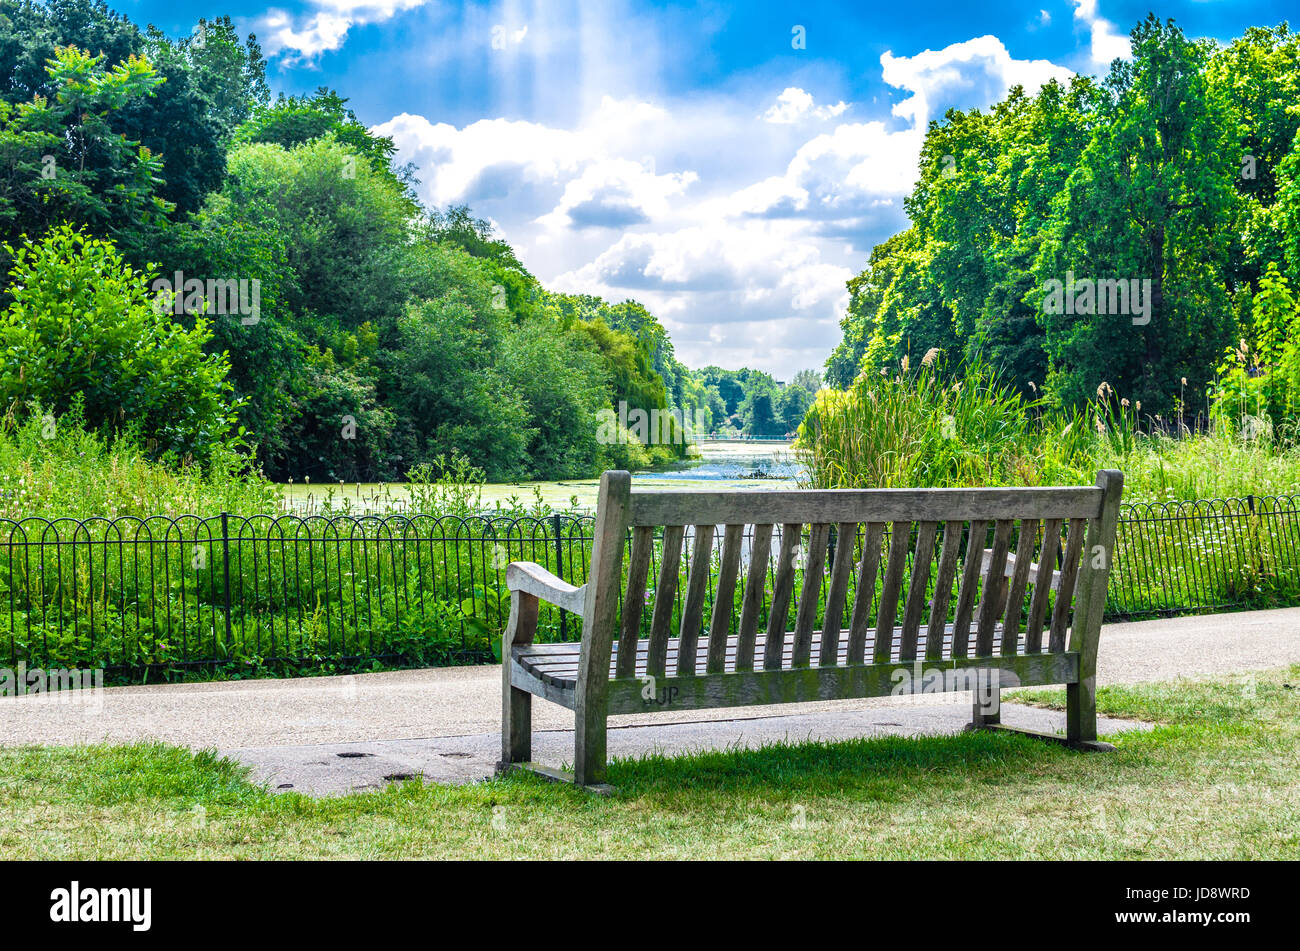 A wooden bench at St James's Park in London Stock Photo